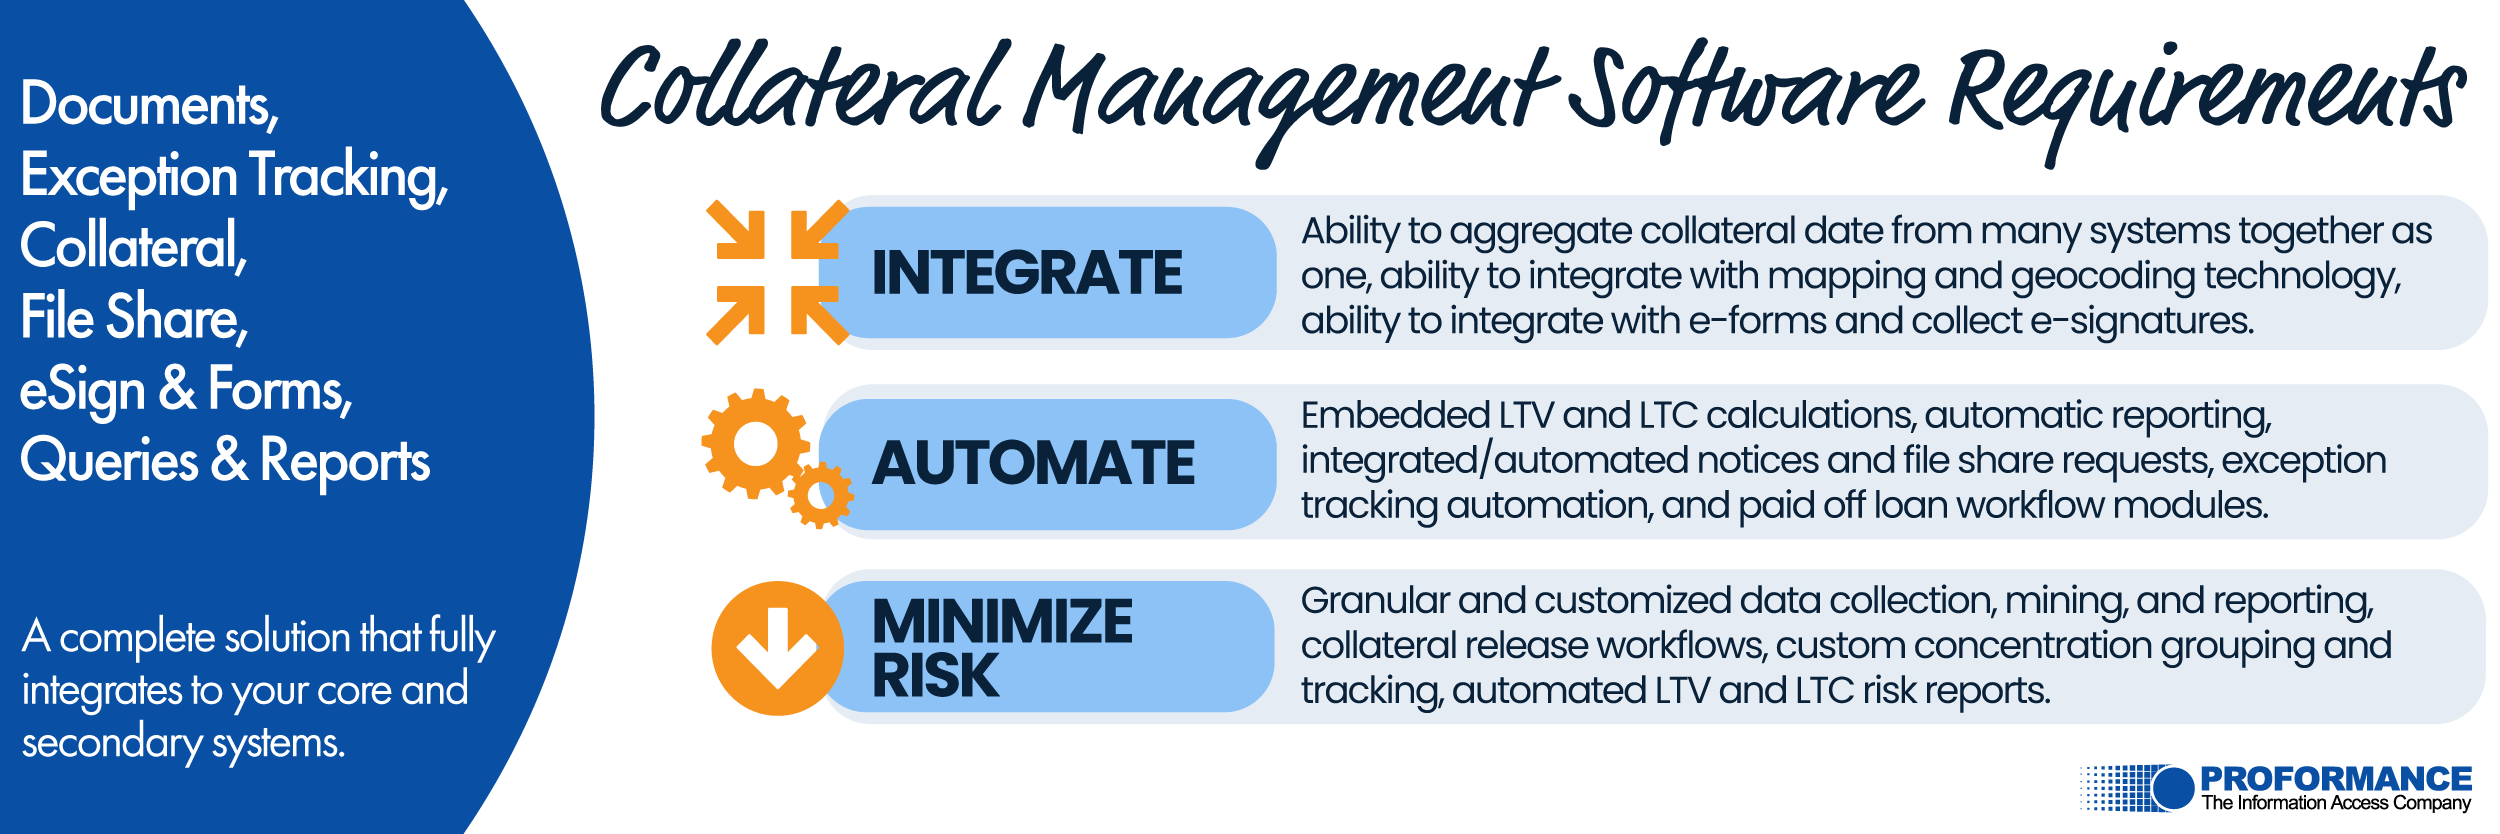 collateral management software requirements-01